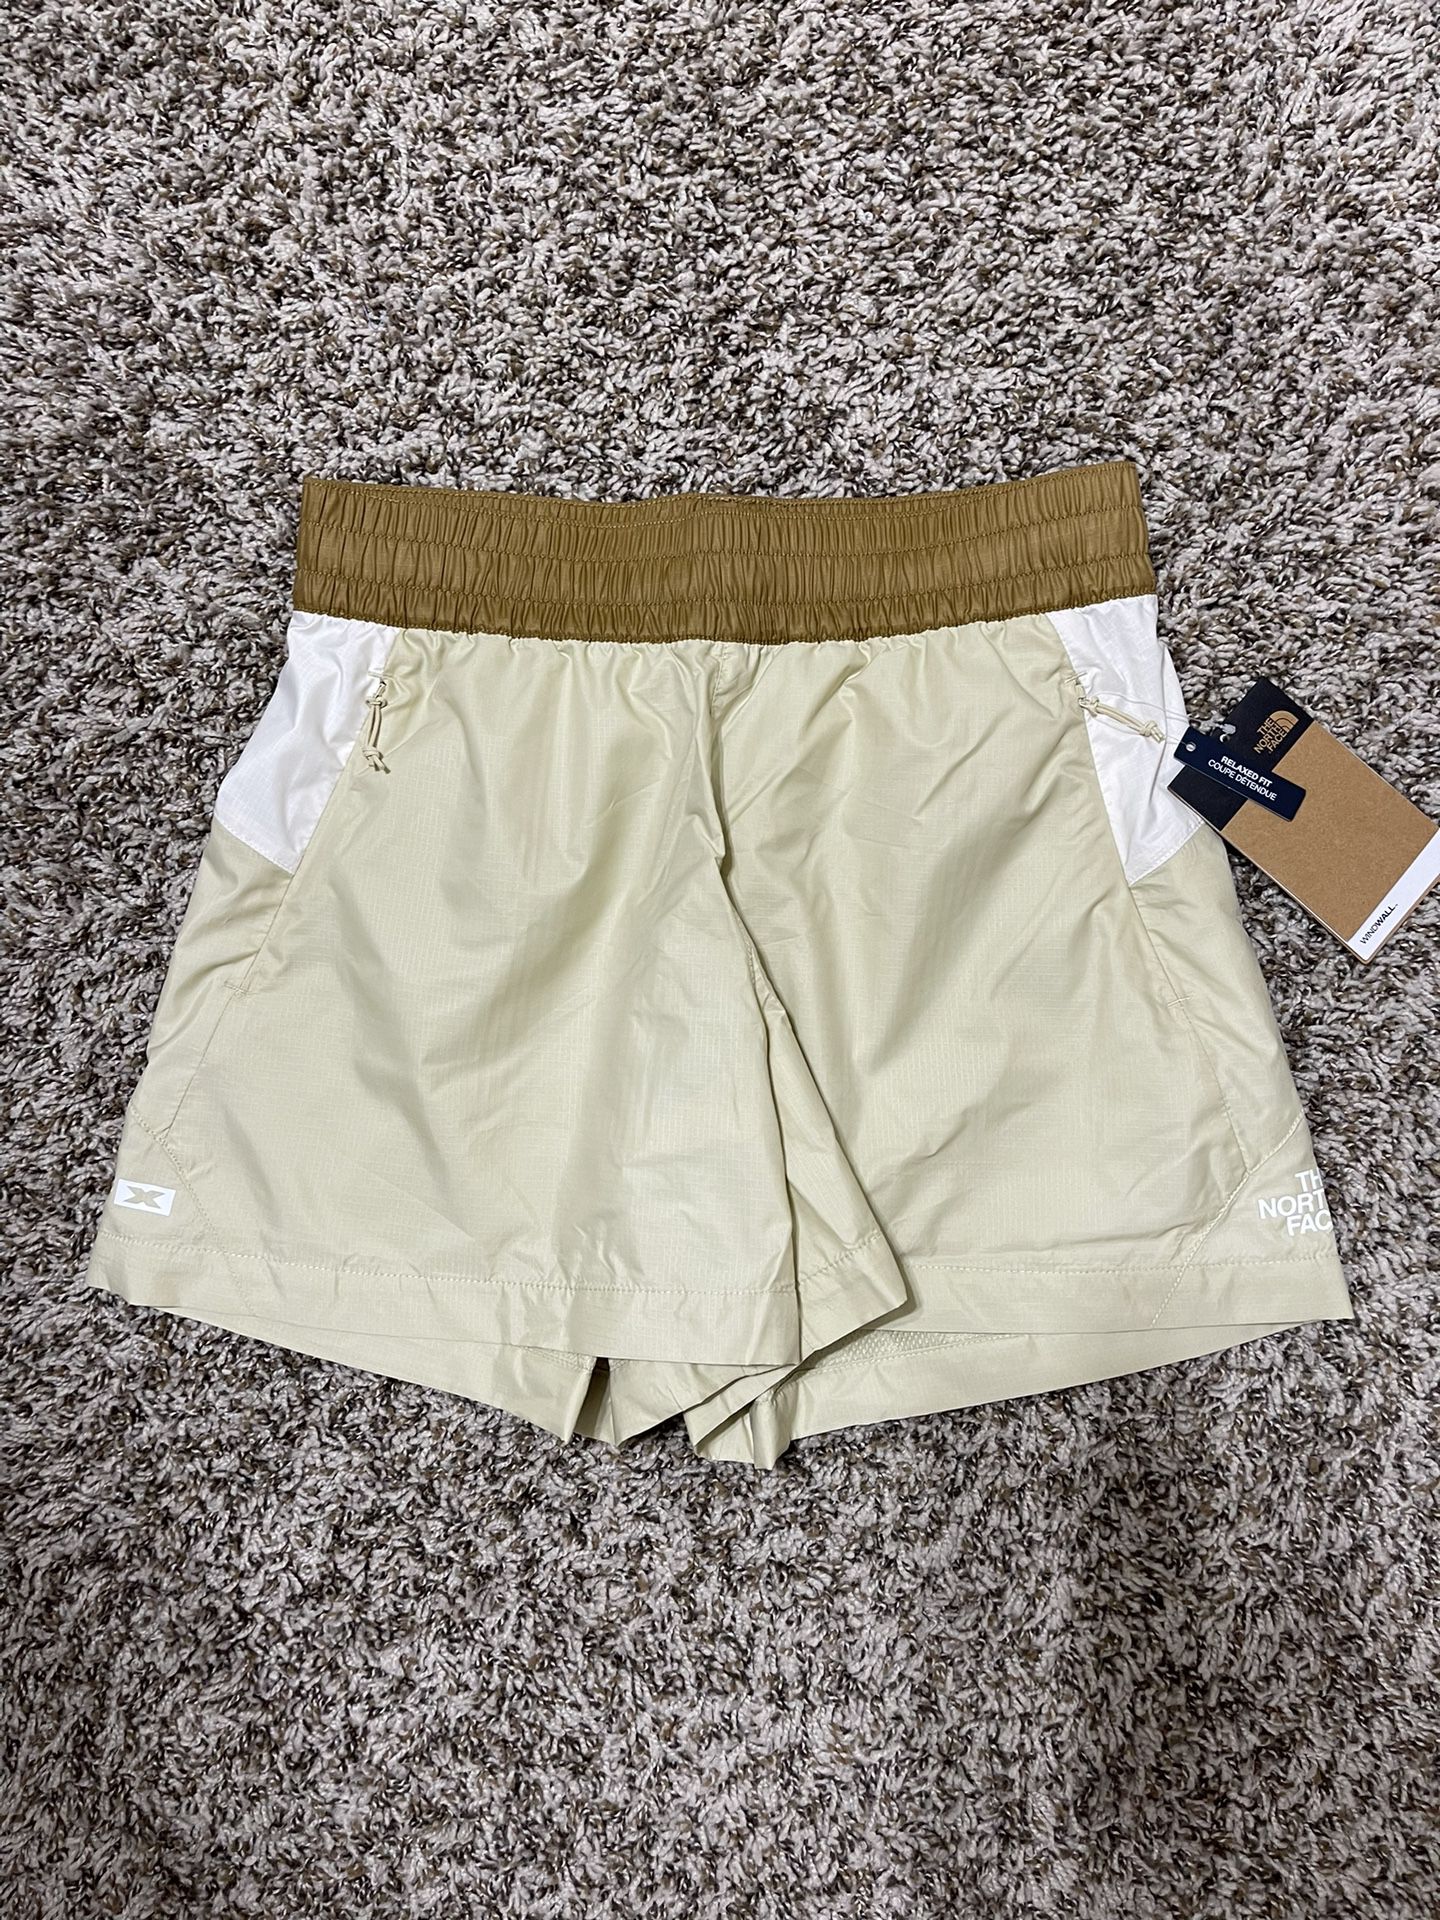 Womens The North Face Shorts